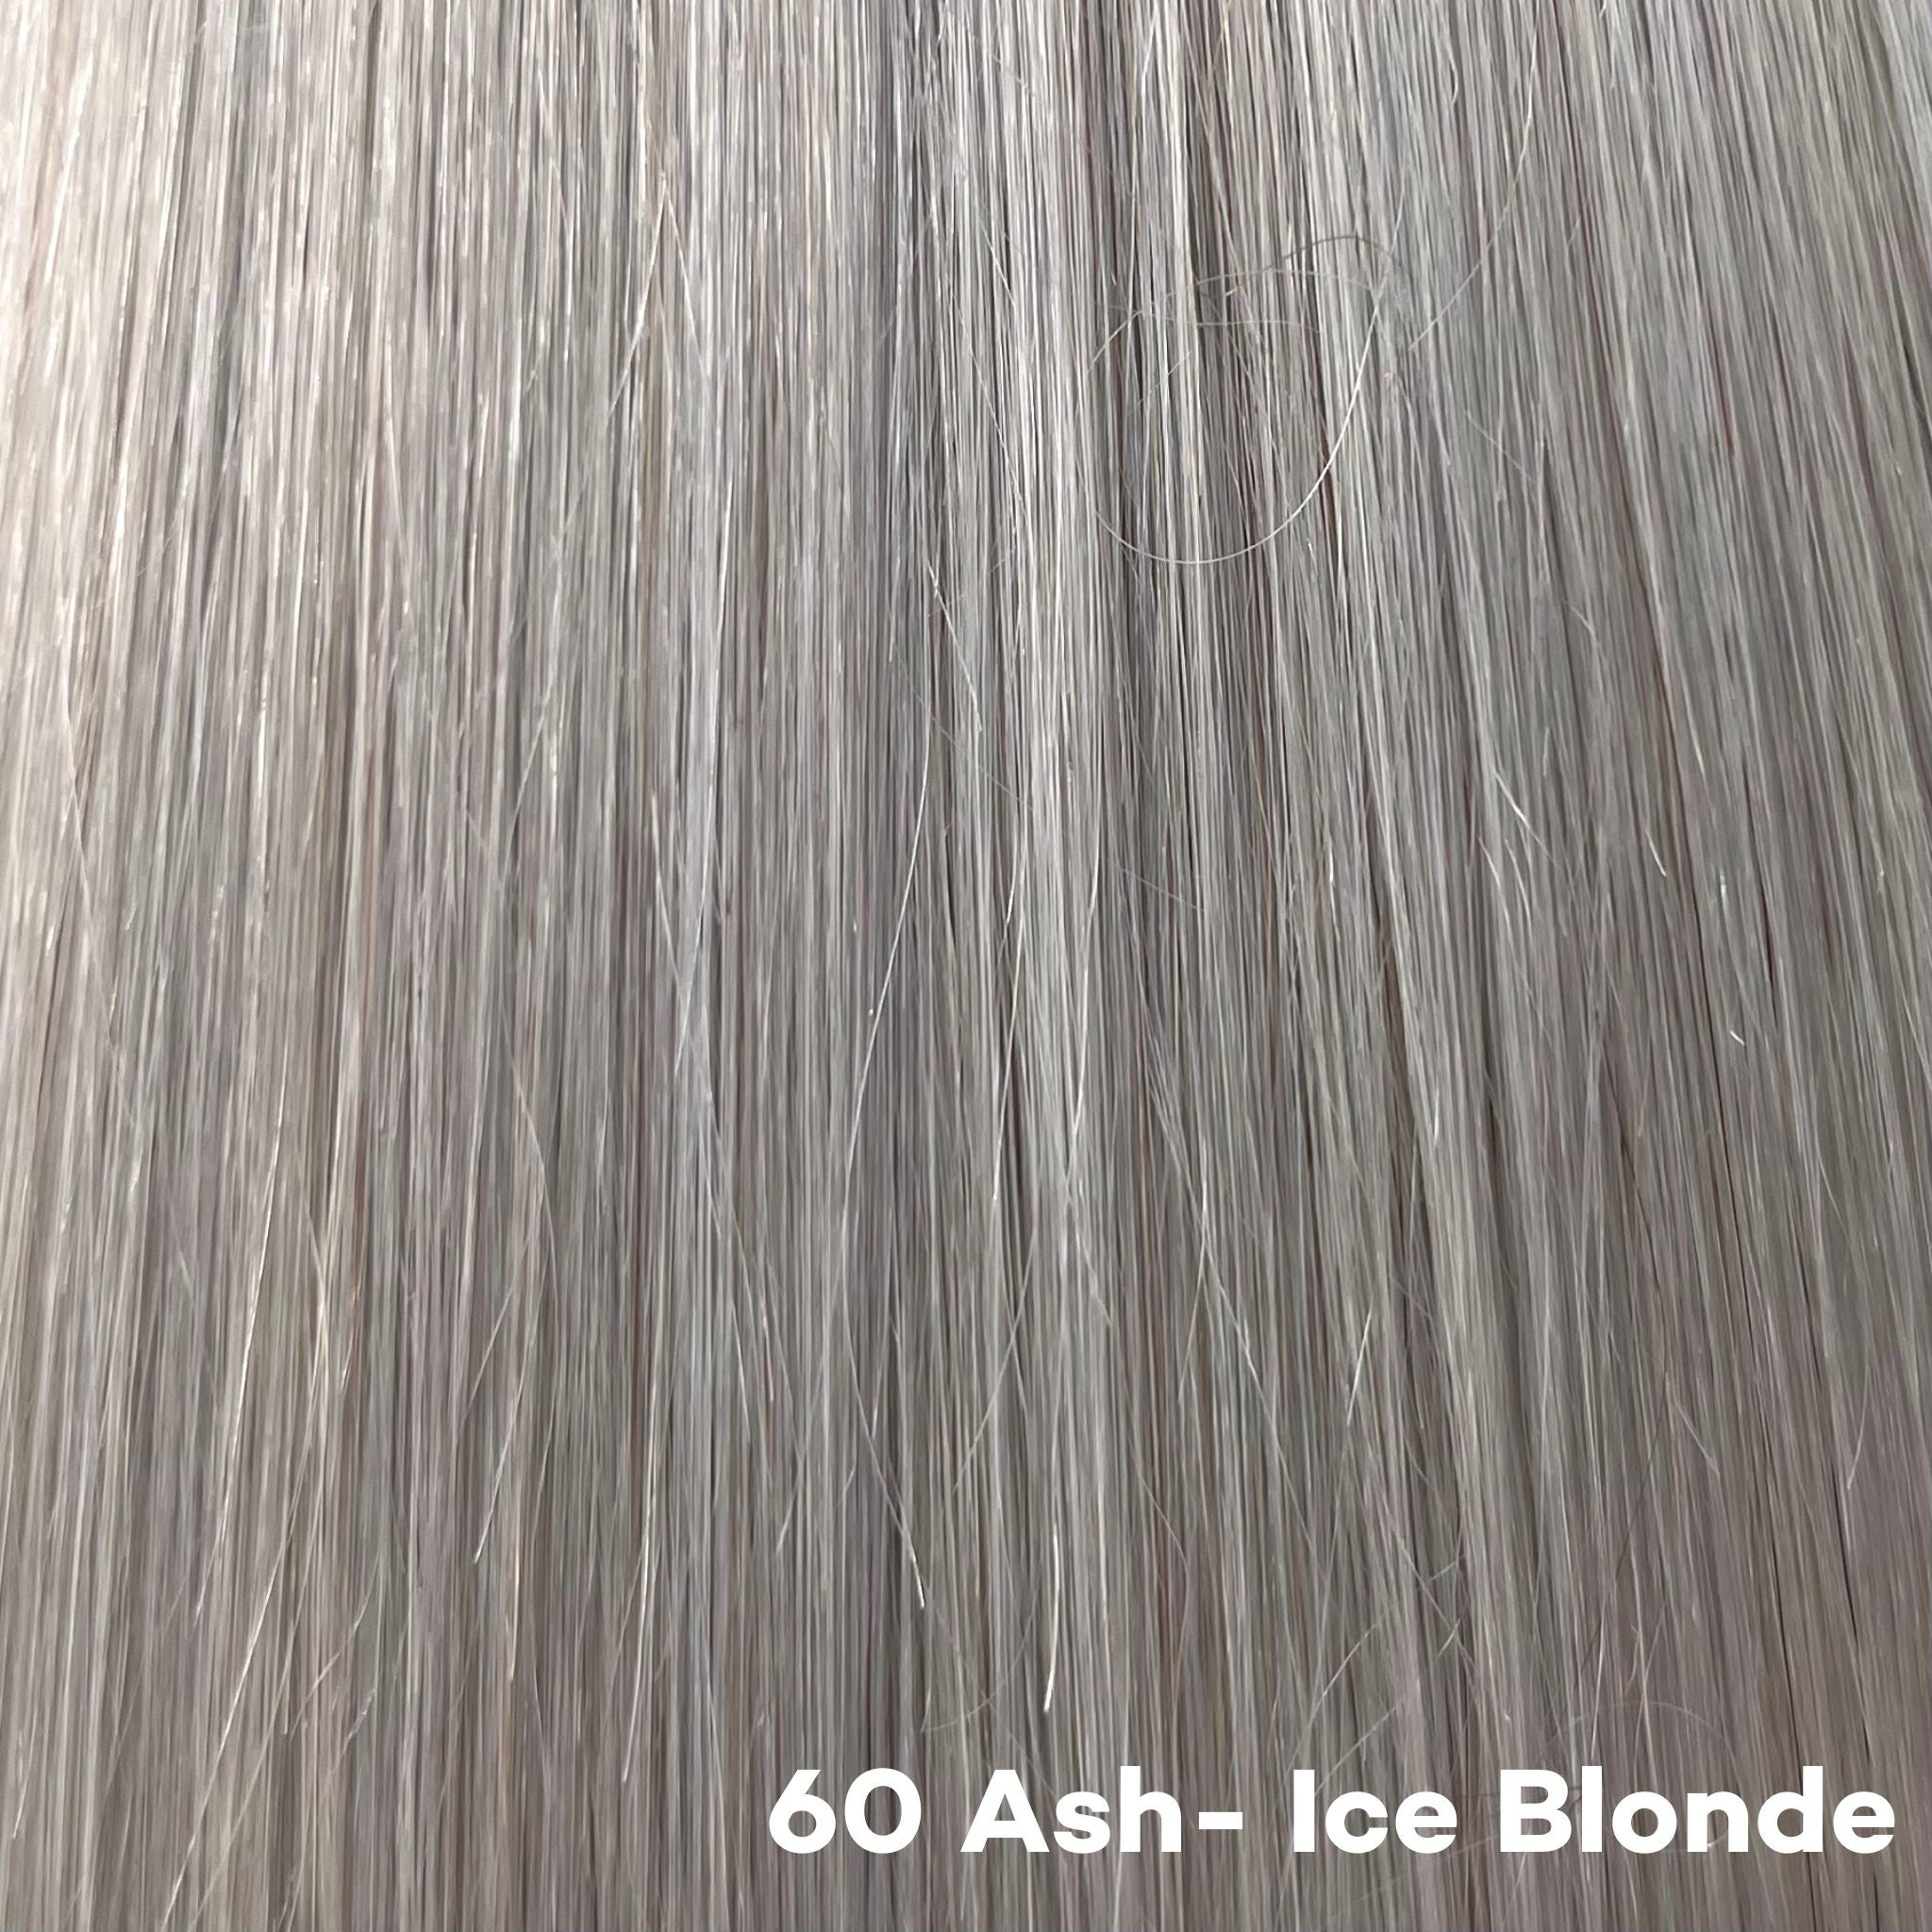 60 ash Slavic Hair Extensions | Bellami Hair Extensions. Find premium hair extensions near me in Augusta, Georgia. Explore tape-in, ponytail, and loc extensions. Discover high-quality hair extensions at Bellami for a stunning hair transformation hand tied hair extensions, tape in hair extensions, ponytail hair extensions.